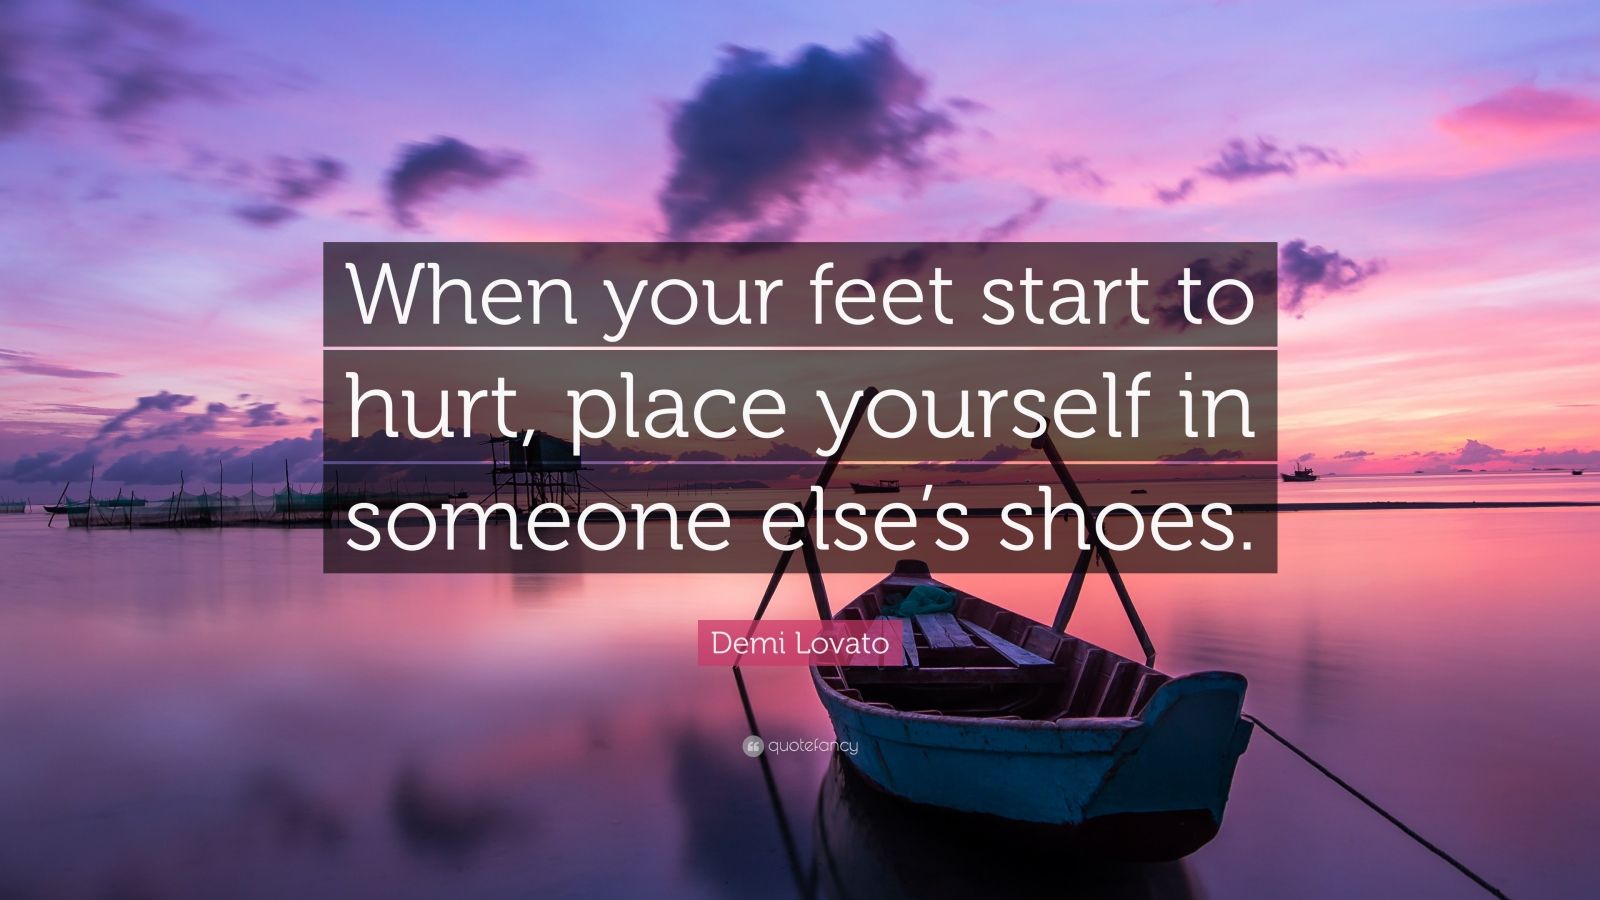 Demi Lovato Quote: “When your feet start to hurt, place yourself in ...